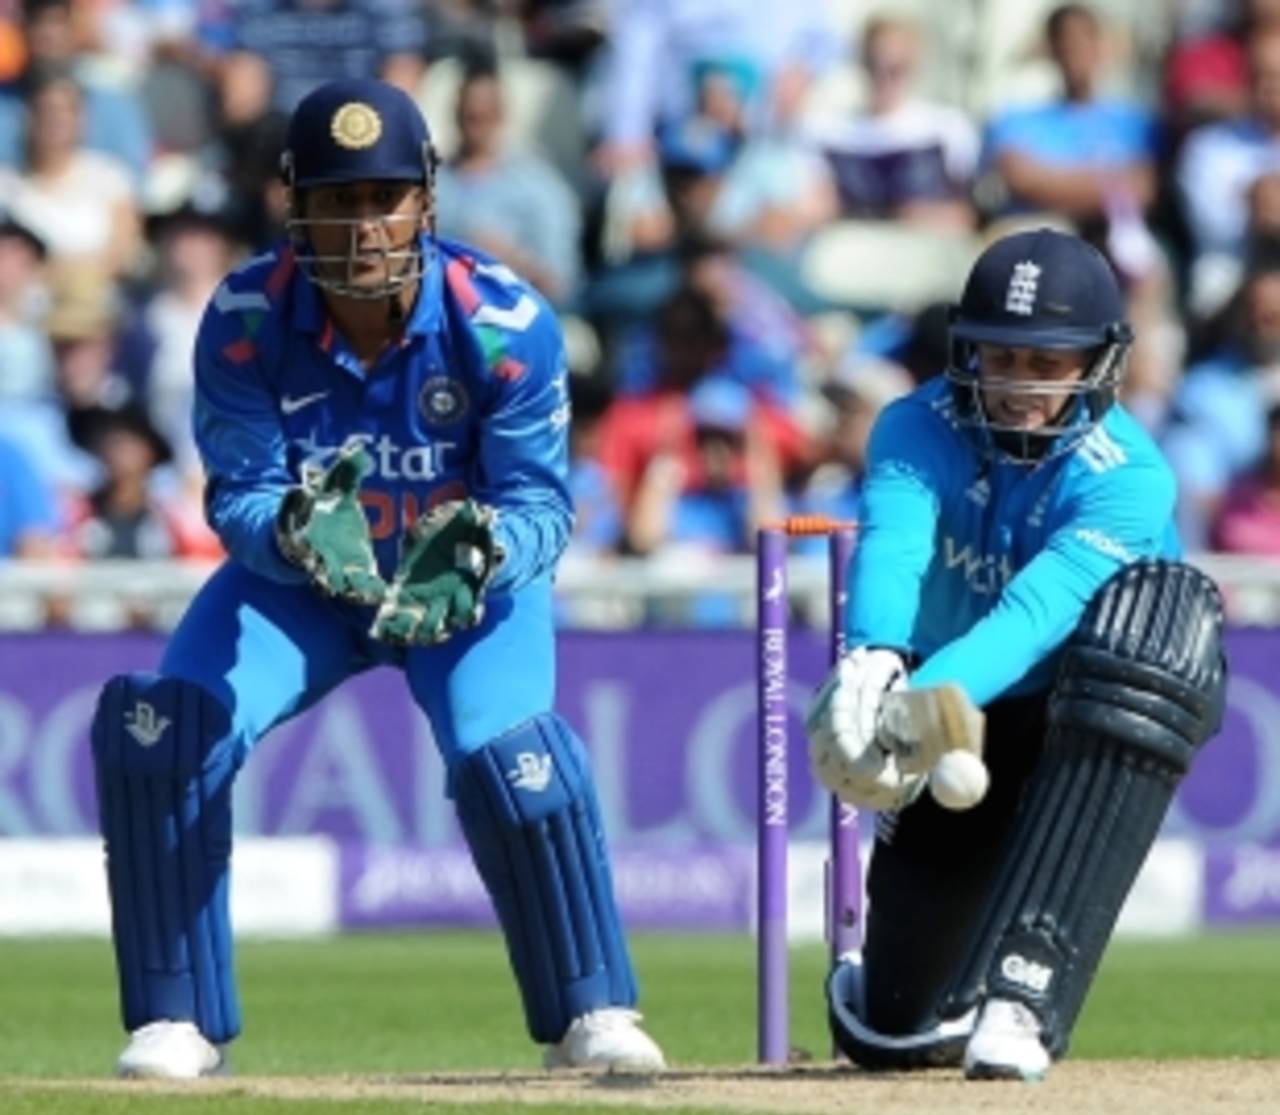 MS Dhoni seems to know exactly where the stumps are while wicketkeeping, even if they are behind him&nbsp;&nbsp;&bull;&nbsp;&nbsp;Associated Press